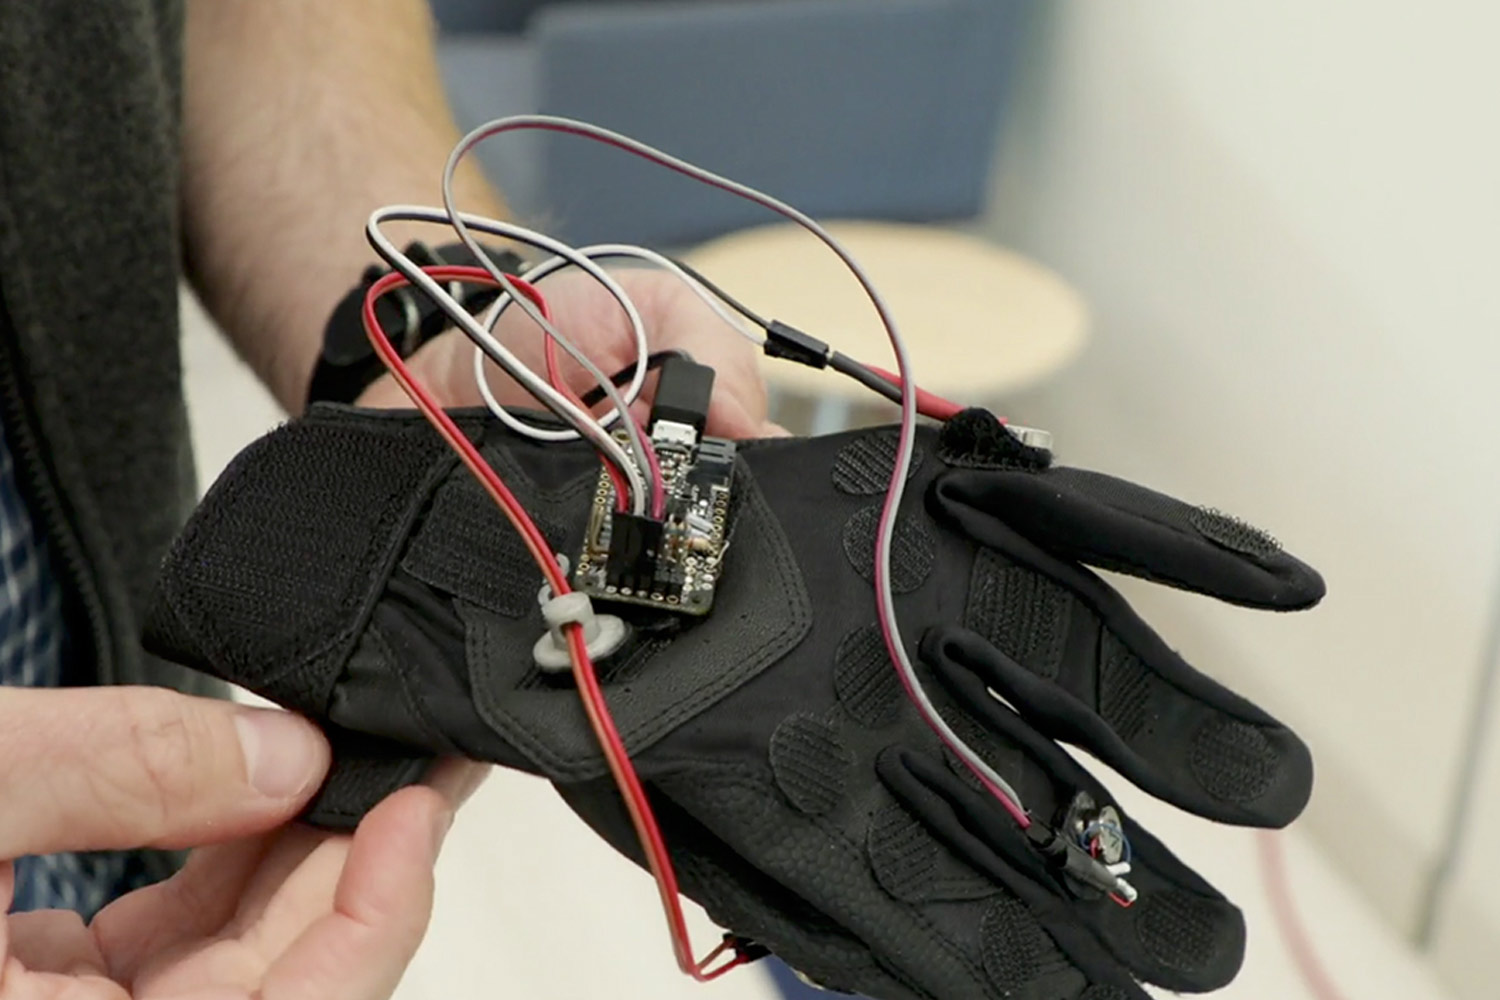 A haptic glove prototype being tested 